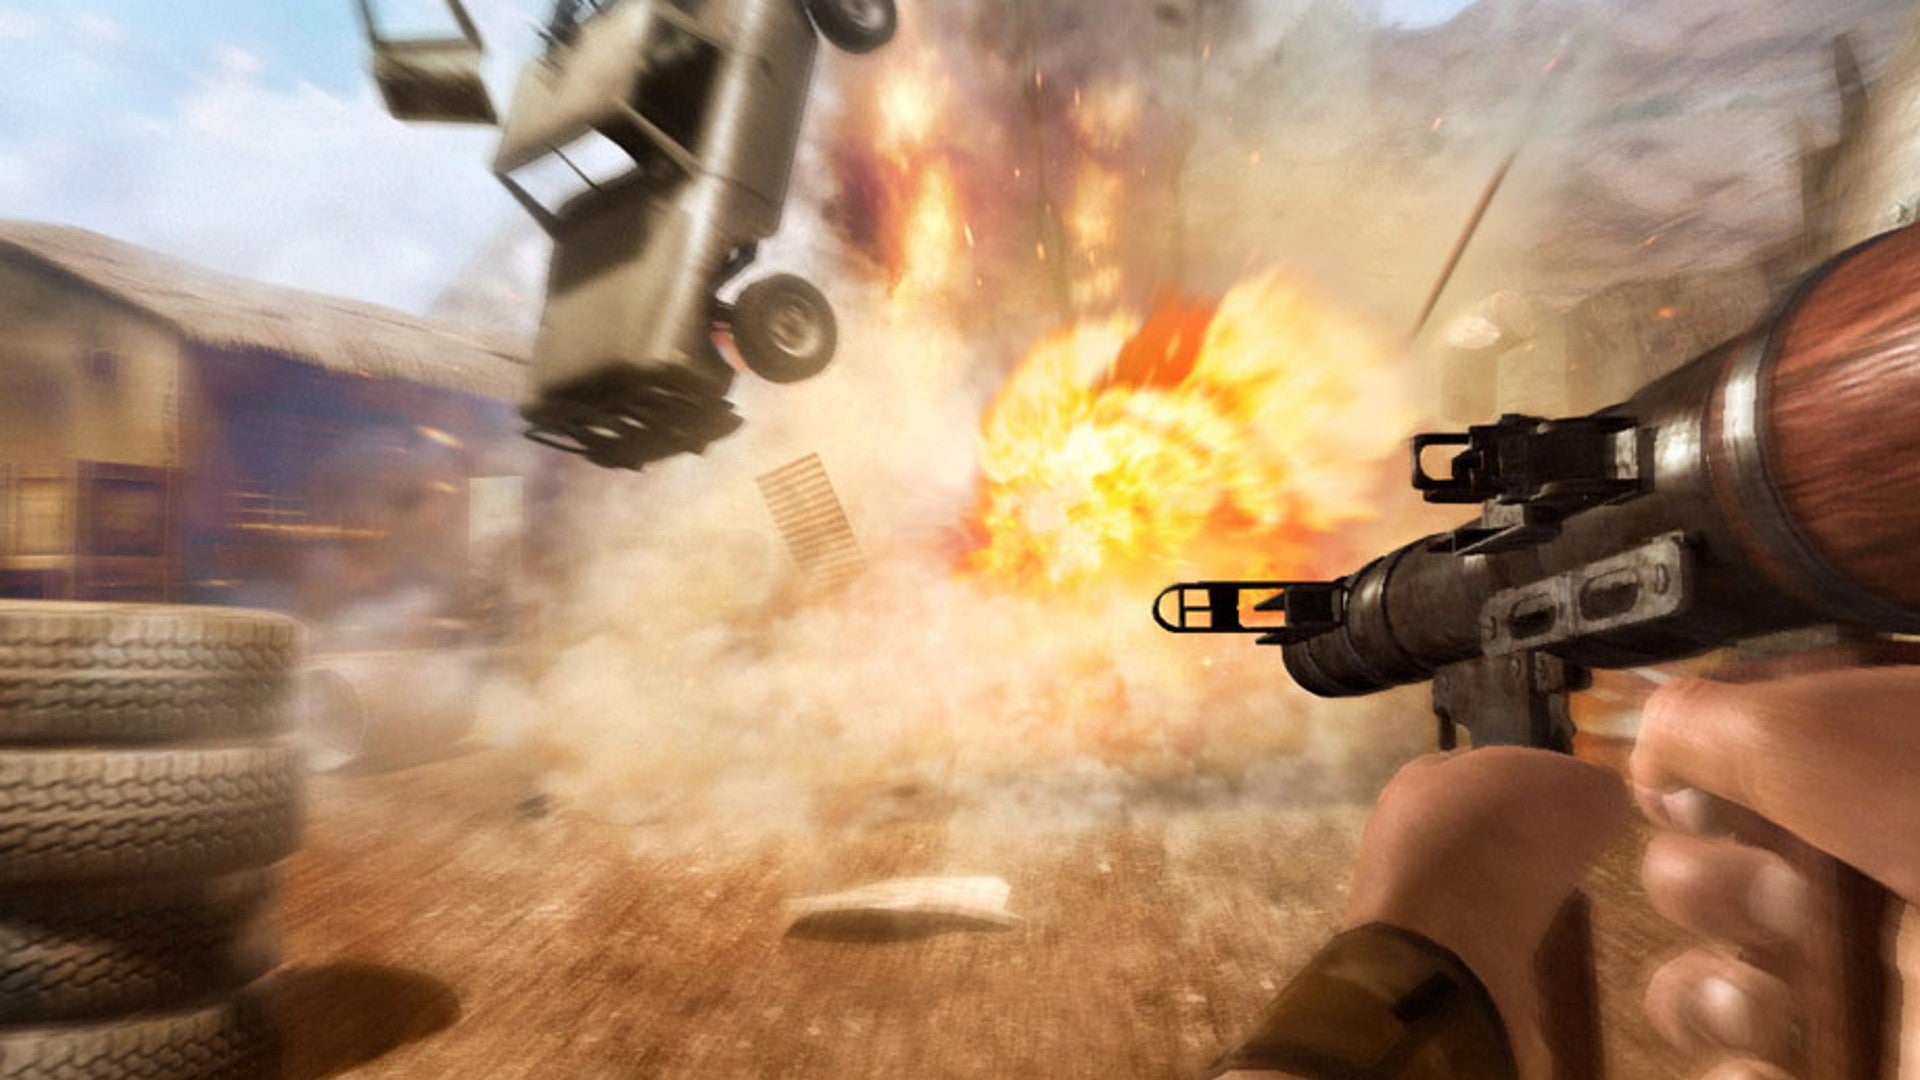 Far Cry 2 image showing a car getting thrown into the air by a fiery explosion, while the player holds an RPG.